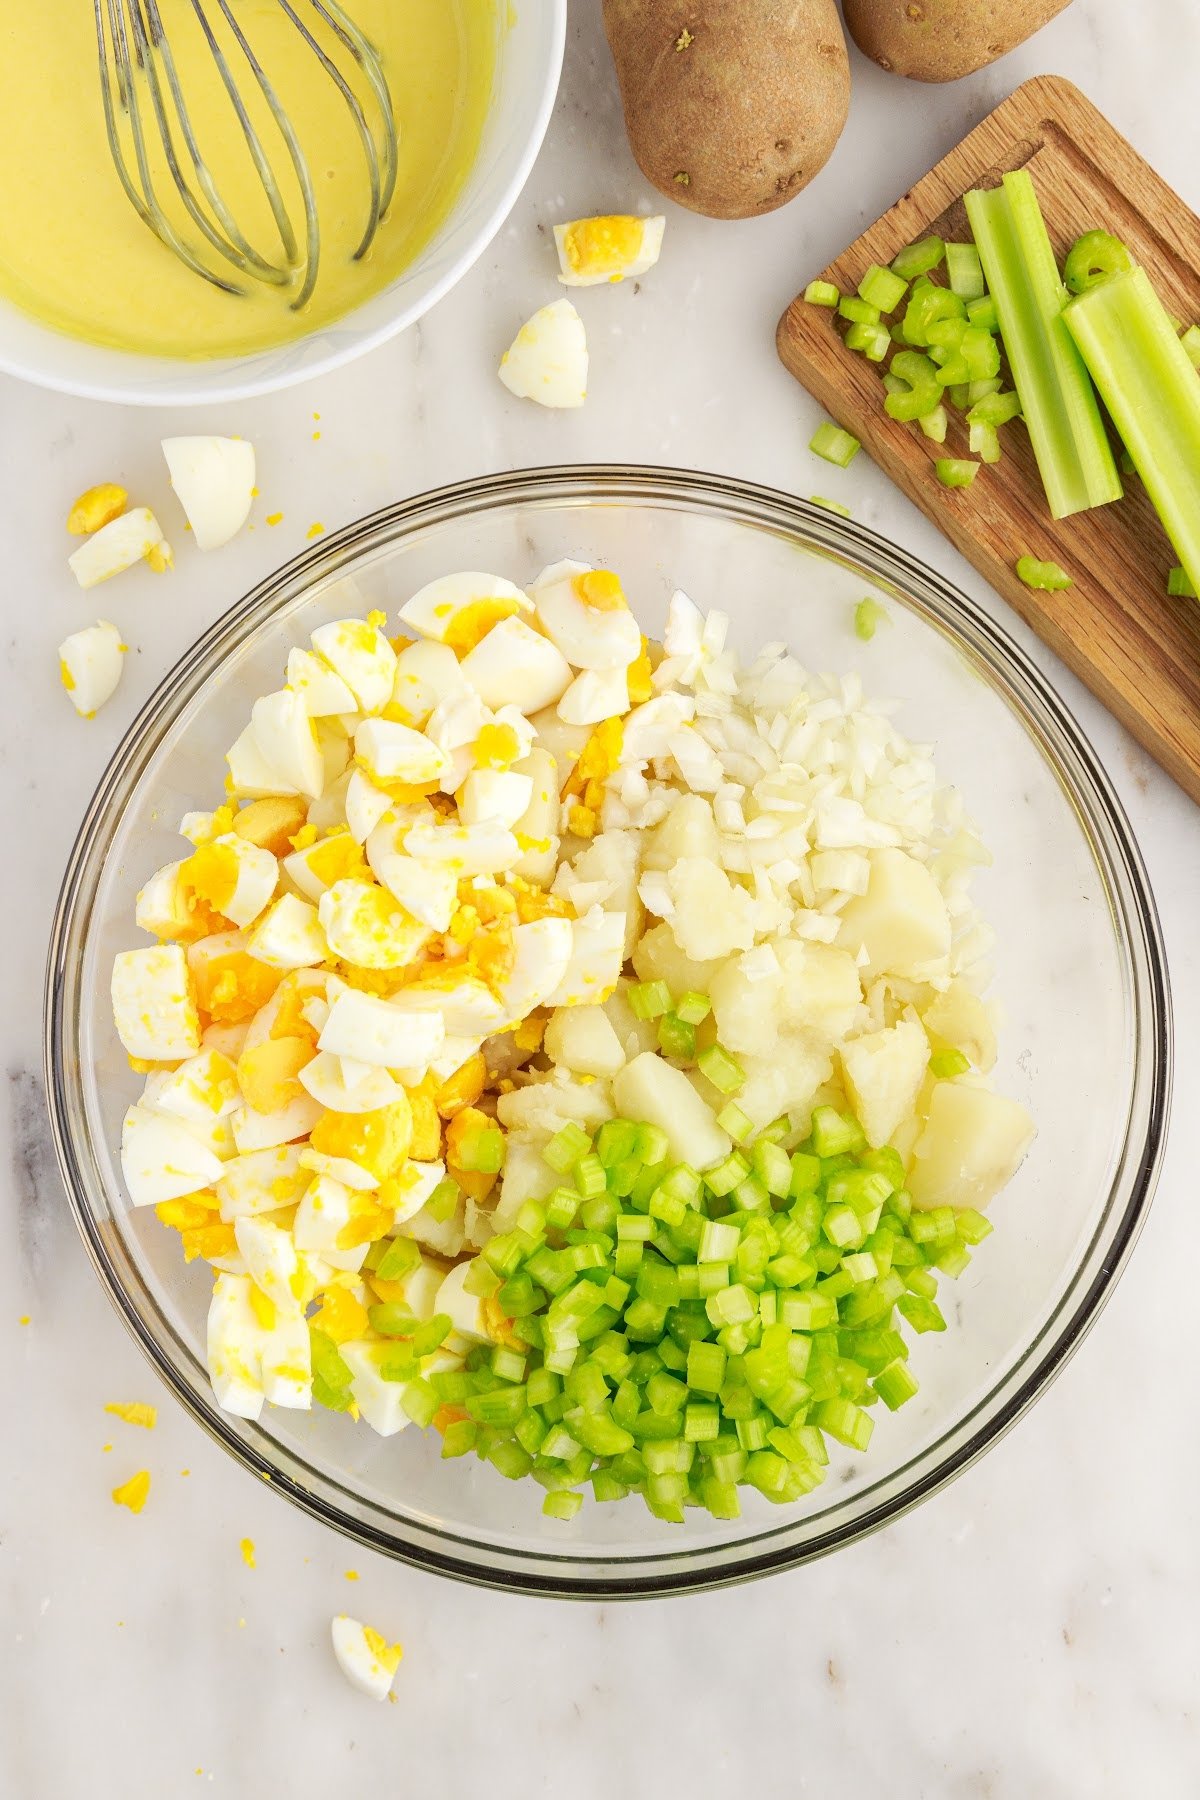 Celery, potatoes, eggs, and onion in a serving bowl.